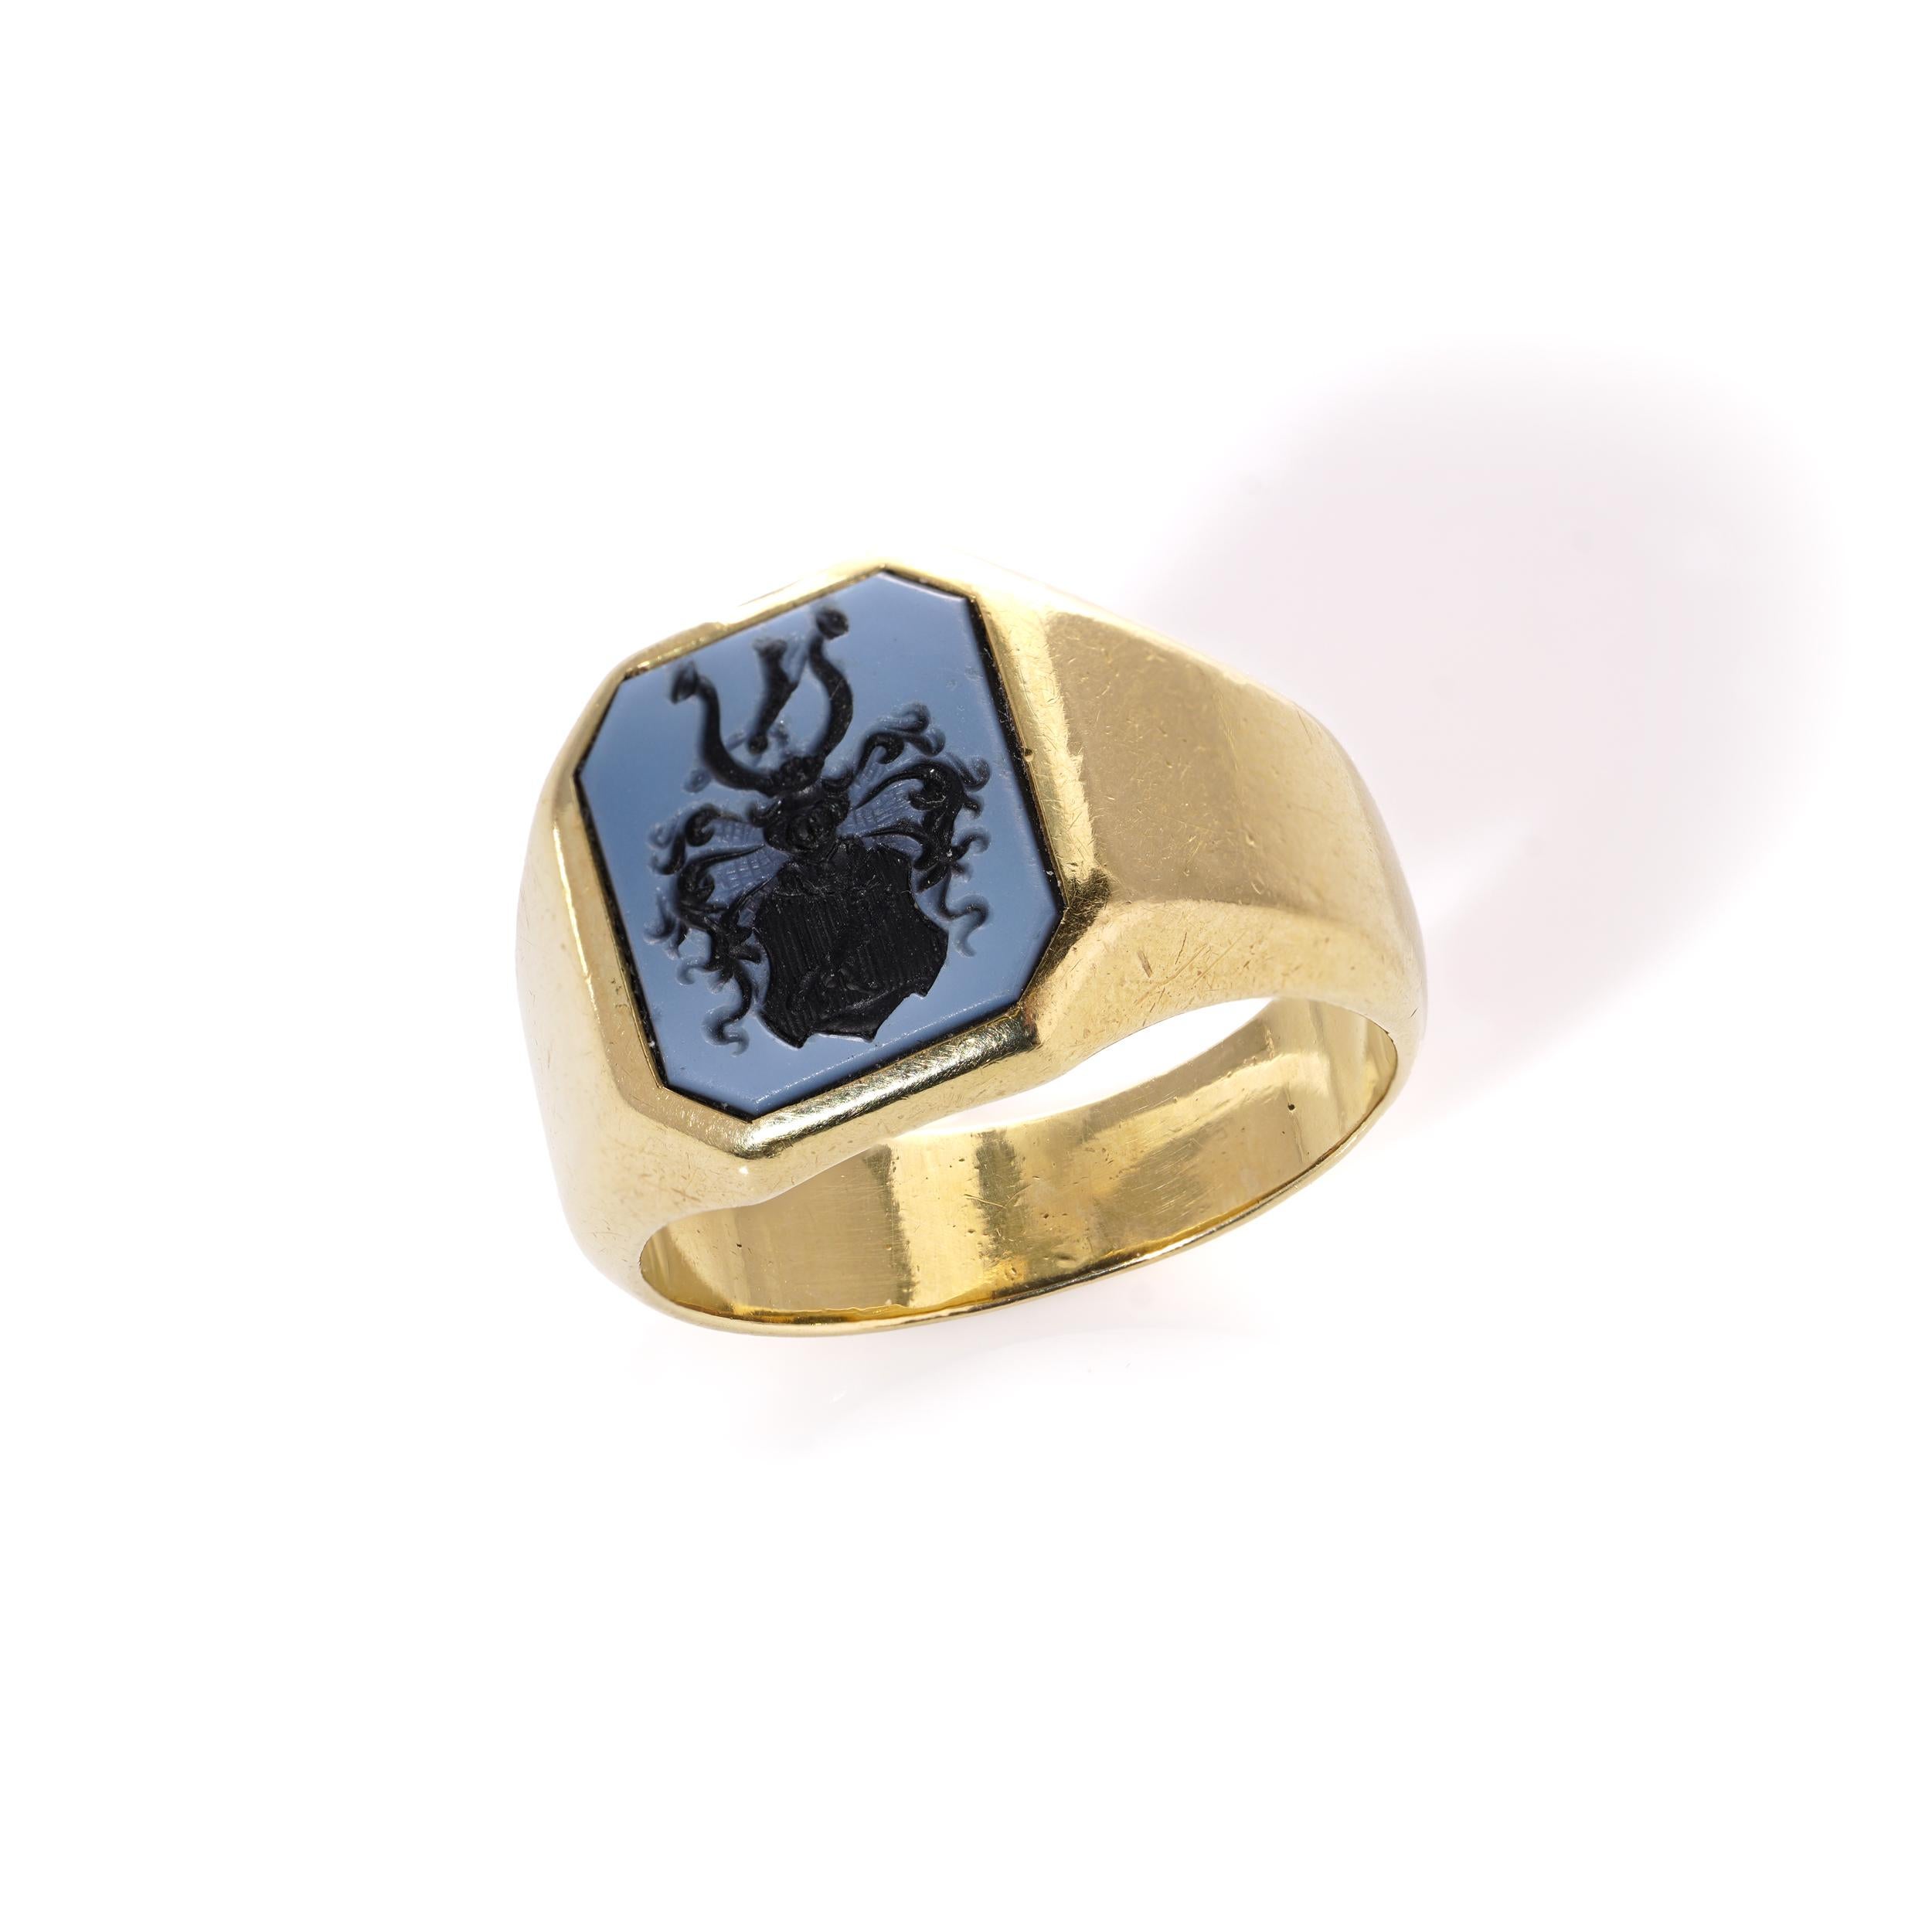 Antique signet ring with a family crest with carved sardonyx intaglio.

Dimensions -
Ring Size: 2.4 x 2.4 x 1.4 cm
Finger Size (UK) = S (EU) = 60 (US) = 9.5

Weight: 12.7 grams

Condition: Pre-owned, minor signs of usage, otherwise good condition